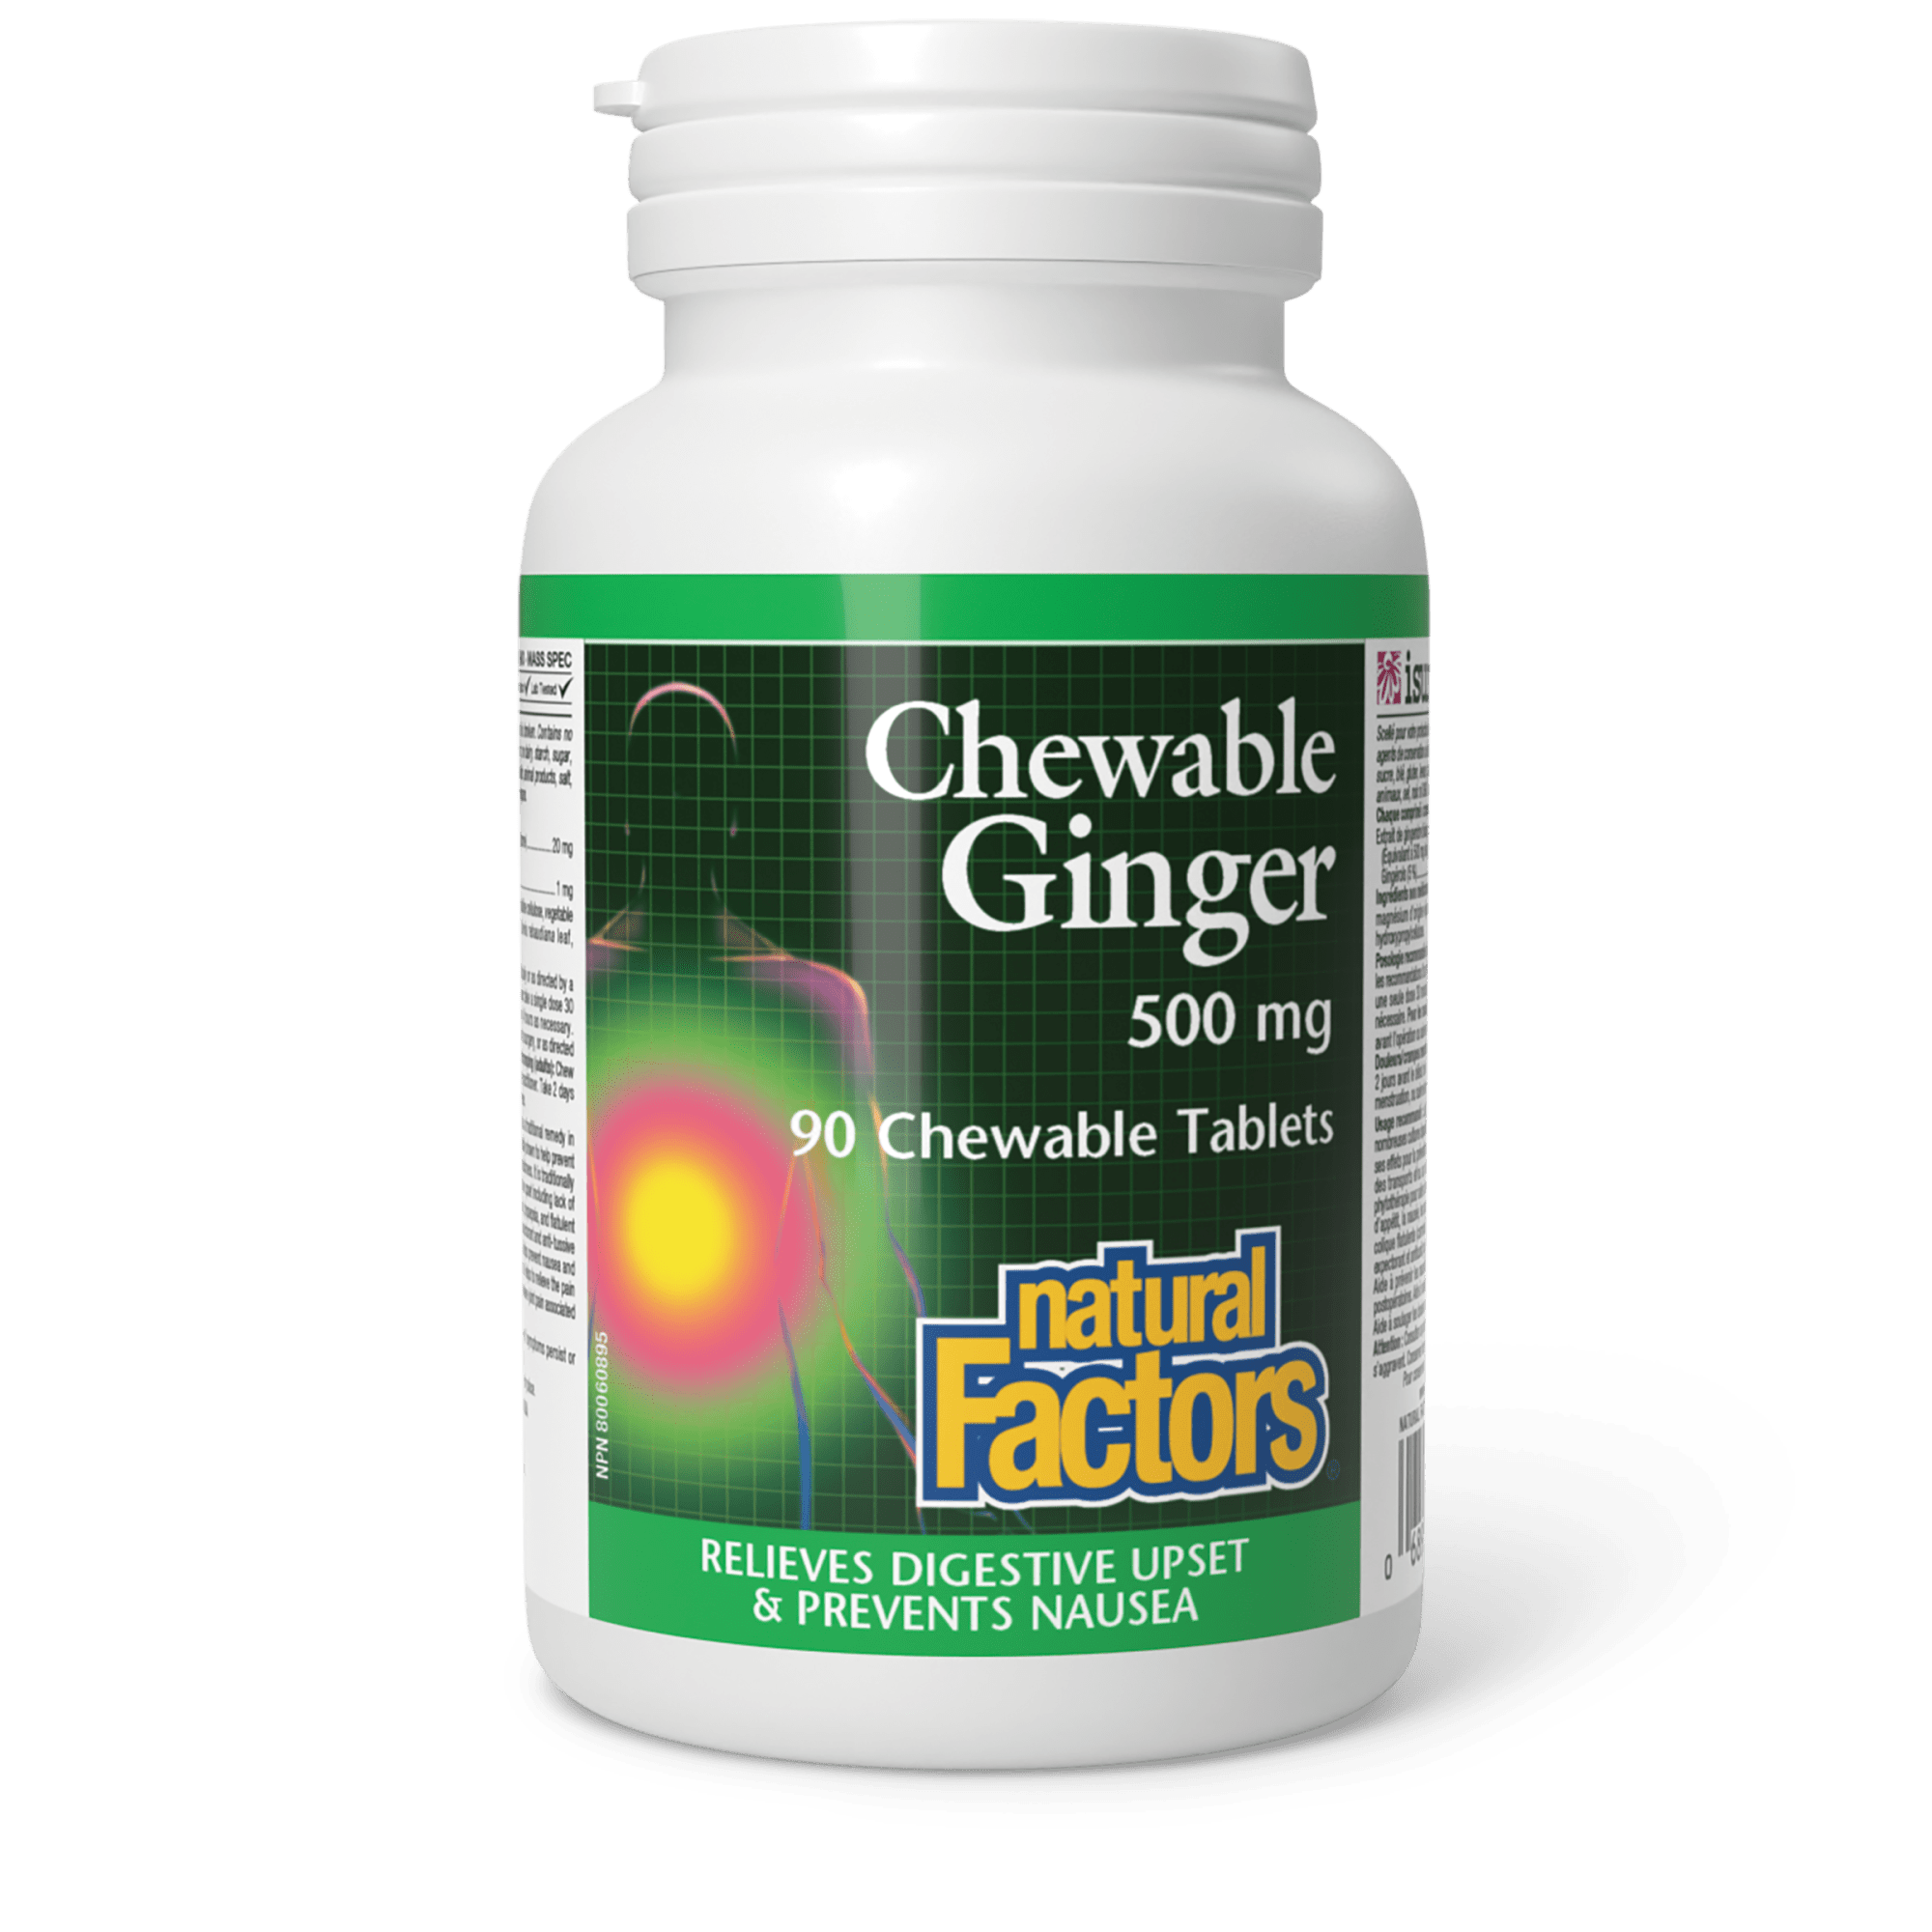 Natural Factors Chewable Ginger 500mg 90 Chewable Tablets